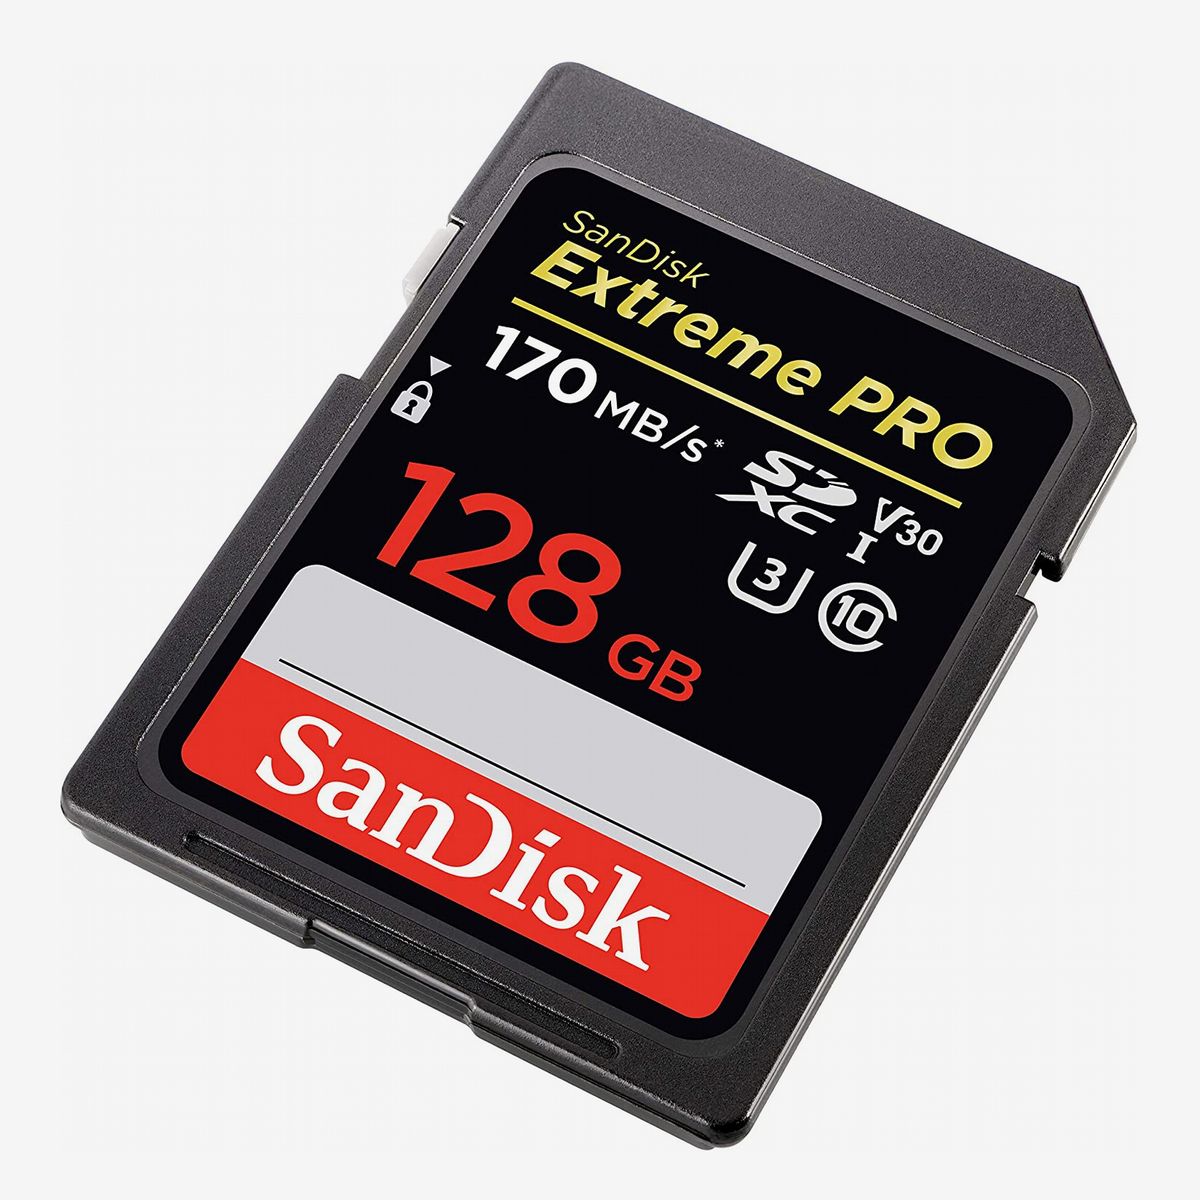 7 Best SD Cards 2021 | The Strategist